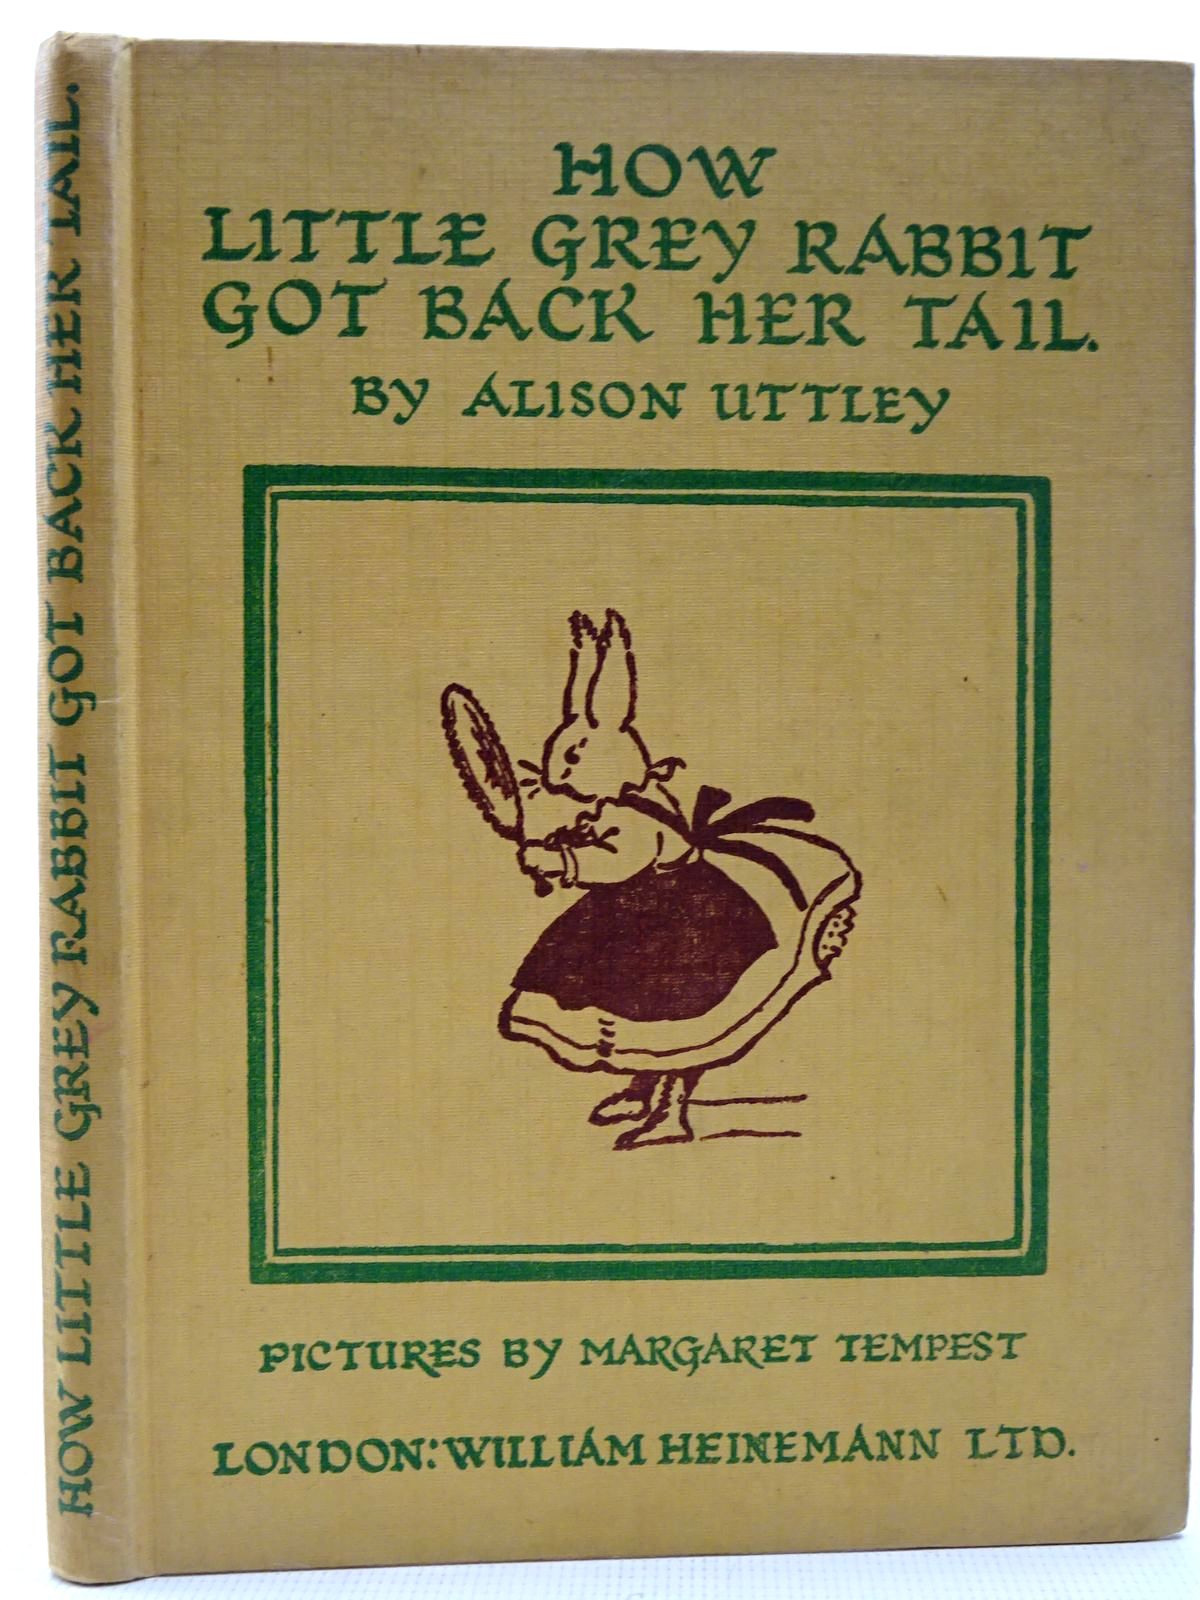 Photo of HOW LITTLE GREY RABBIT GOT BACK HER TAIL written by Uttley, Alison illustrated by Tempest, Margaret published by William Heinemann Ltd. (STOCK CODE: 2126417)  for sale by Stella & Rose's Books